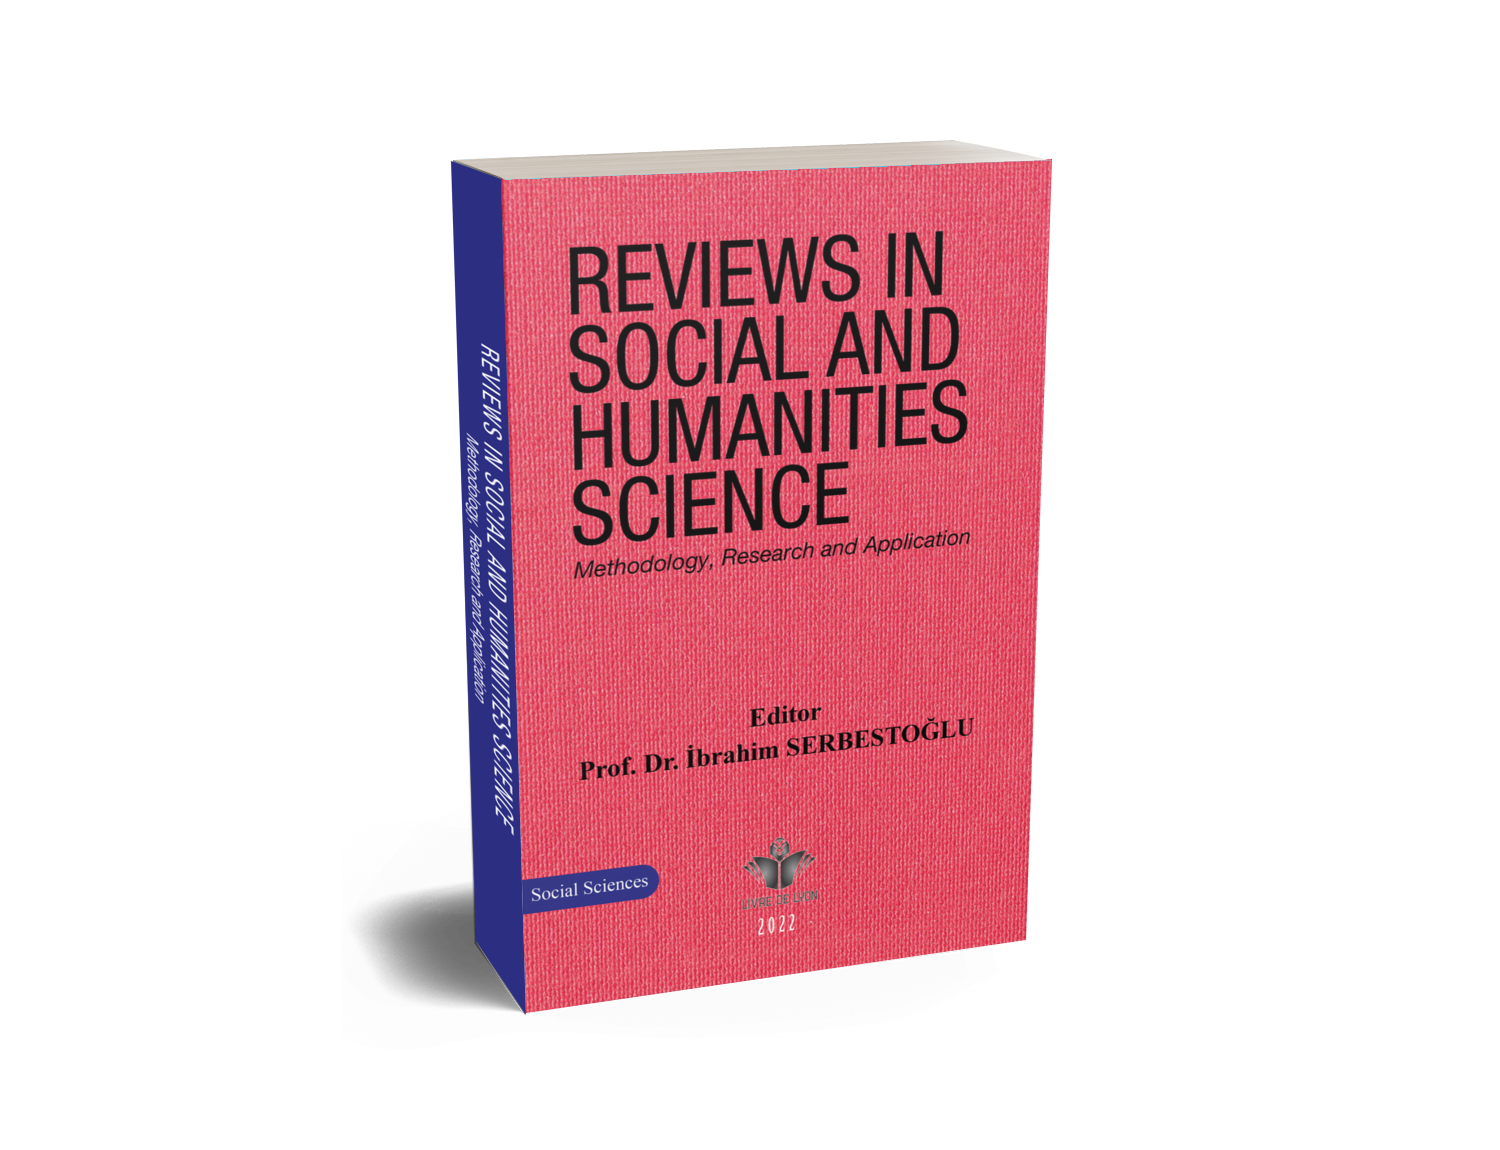 Reviews in Social and Humanities Science Methodology, Research and Application